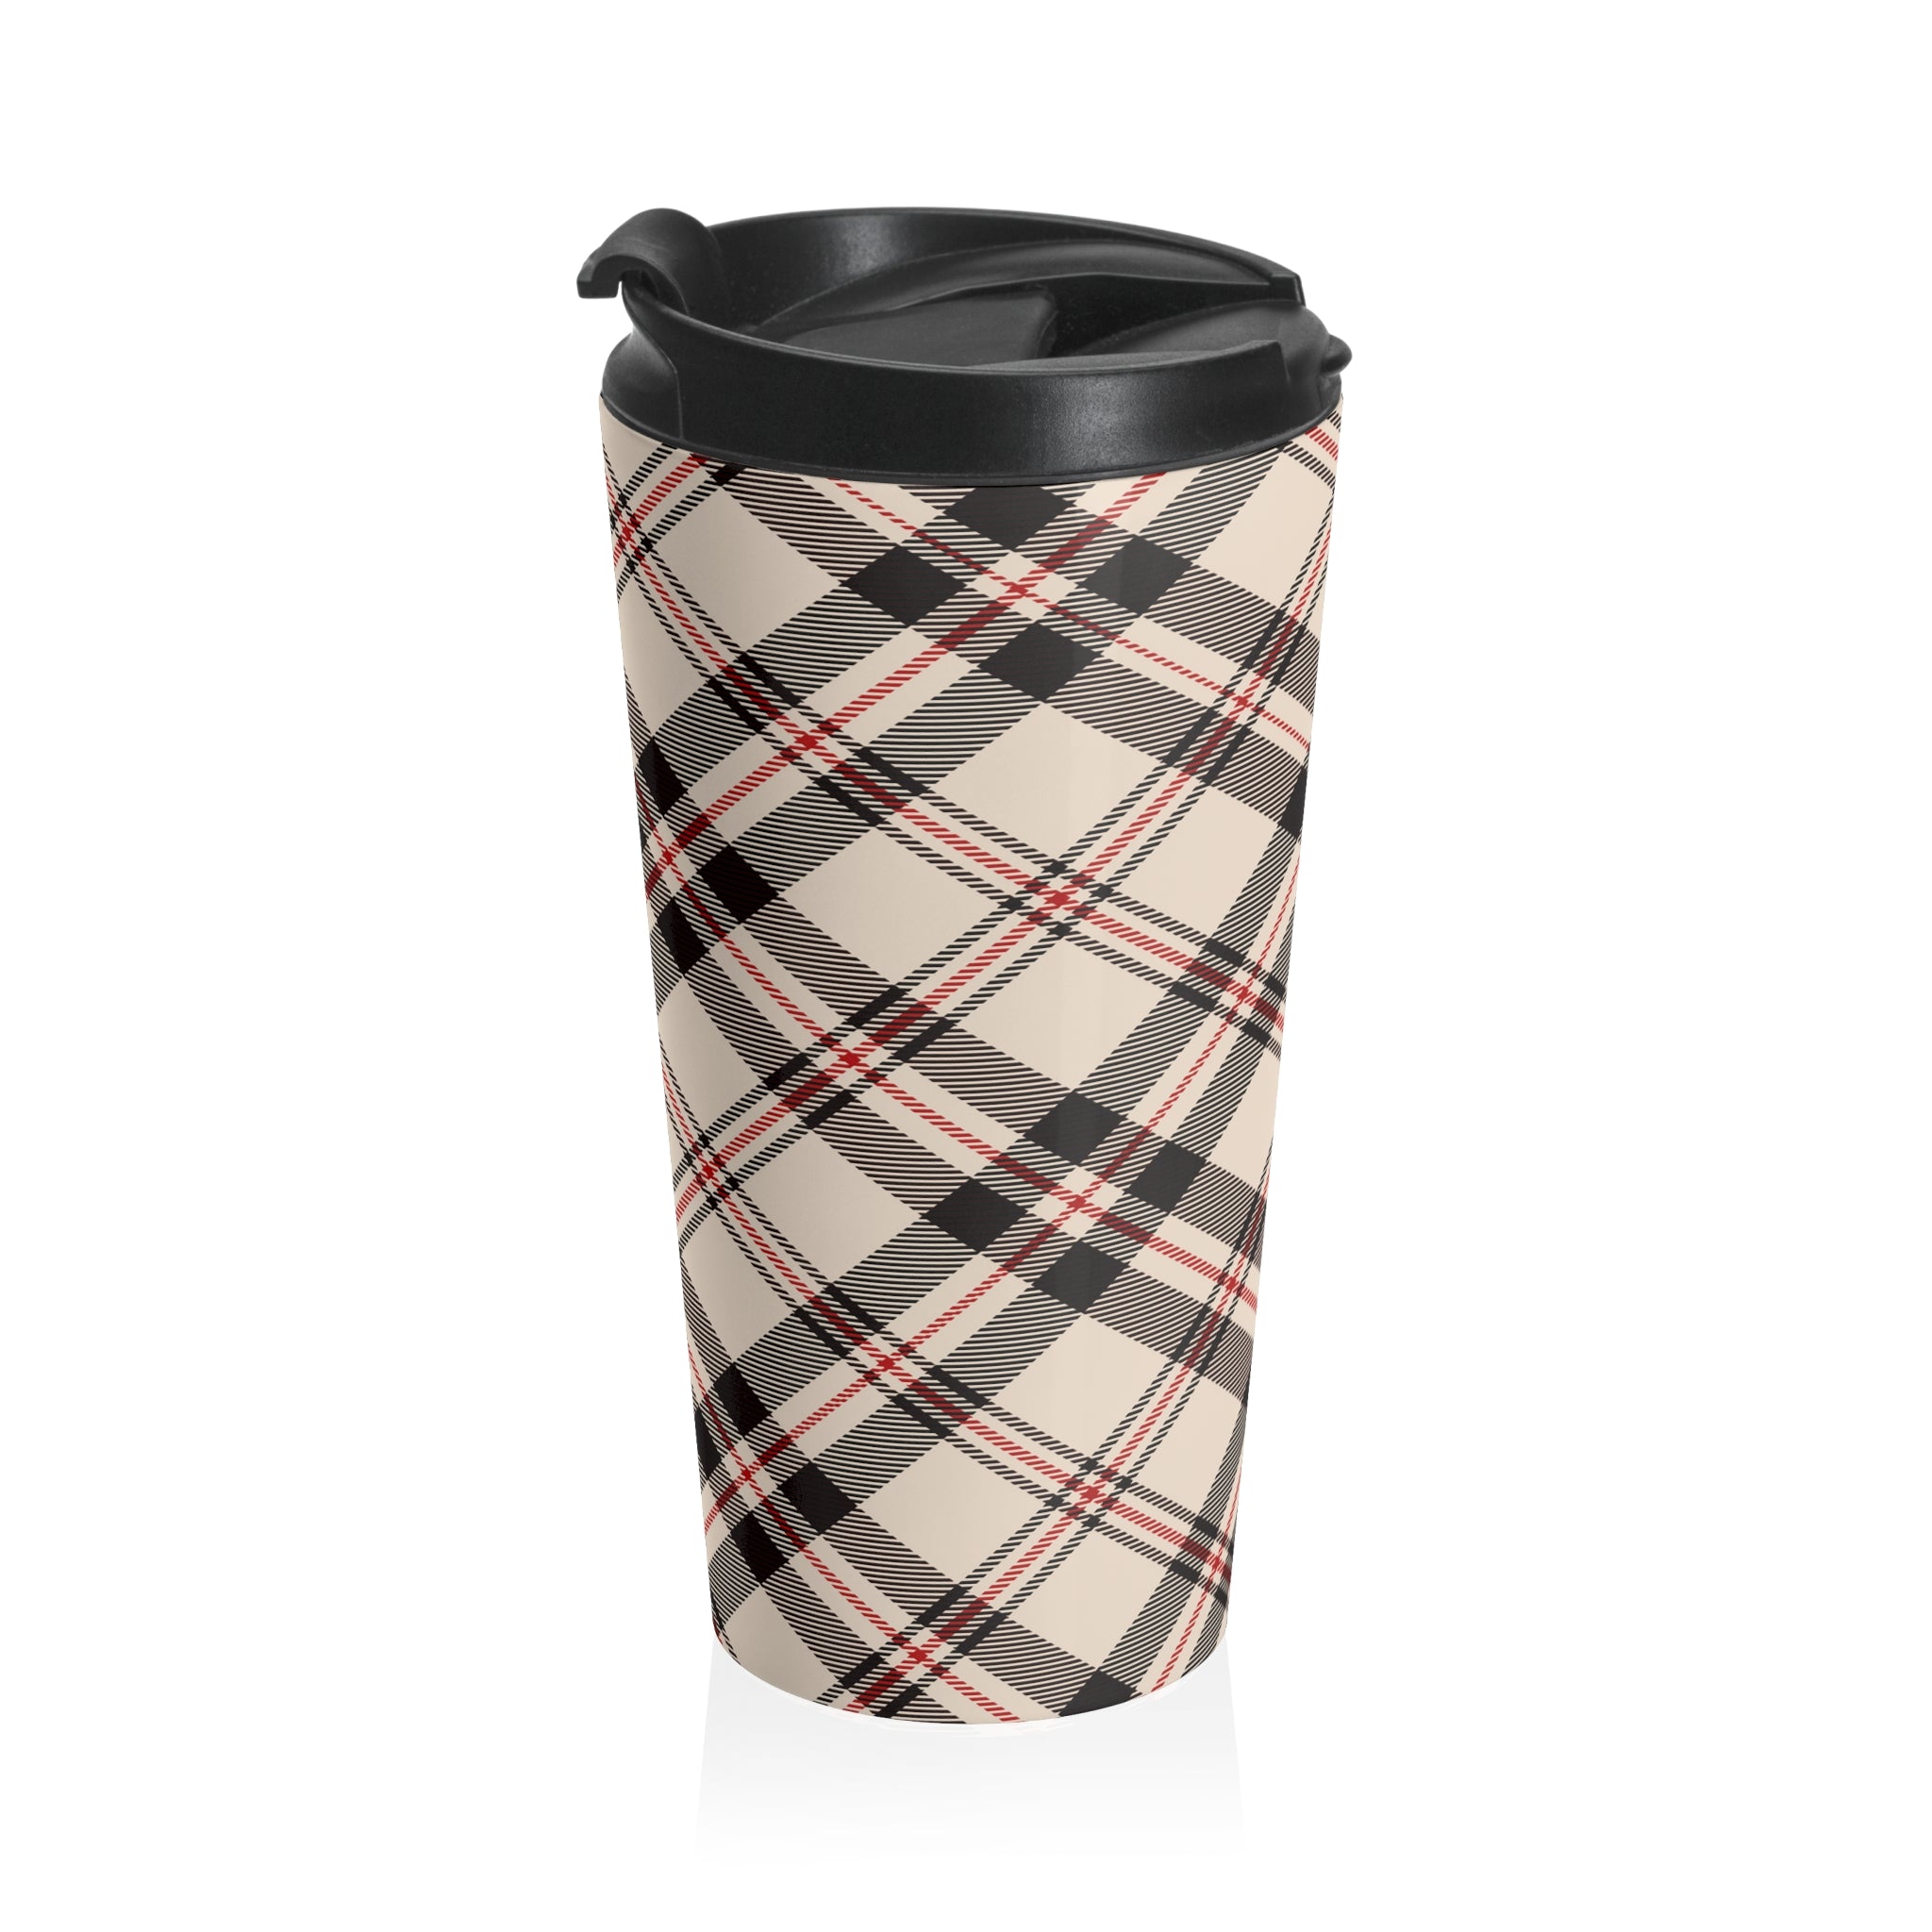  Beige and Red Plaid Stainless Steel Travel Mug, 15oz Plaid Coffee Cup, Cute Travel Mug, Stainless Steel Cup Travel Mug